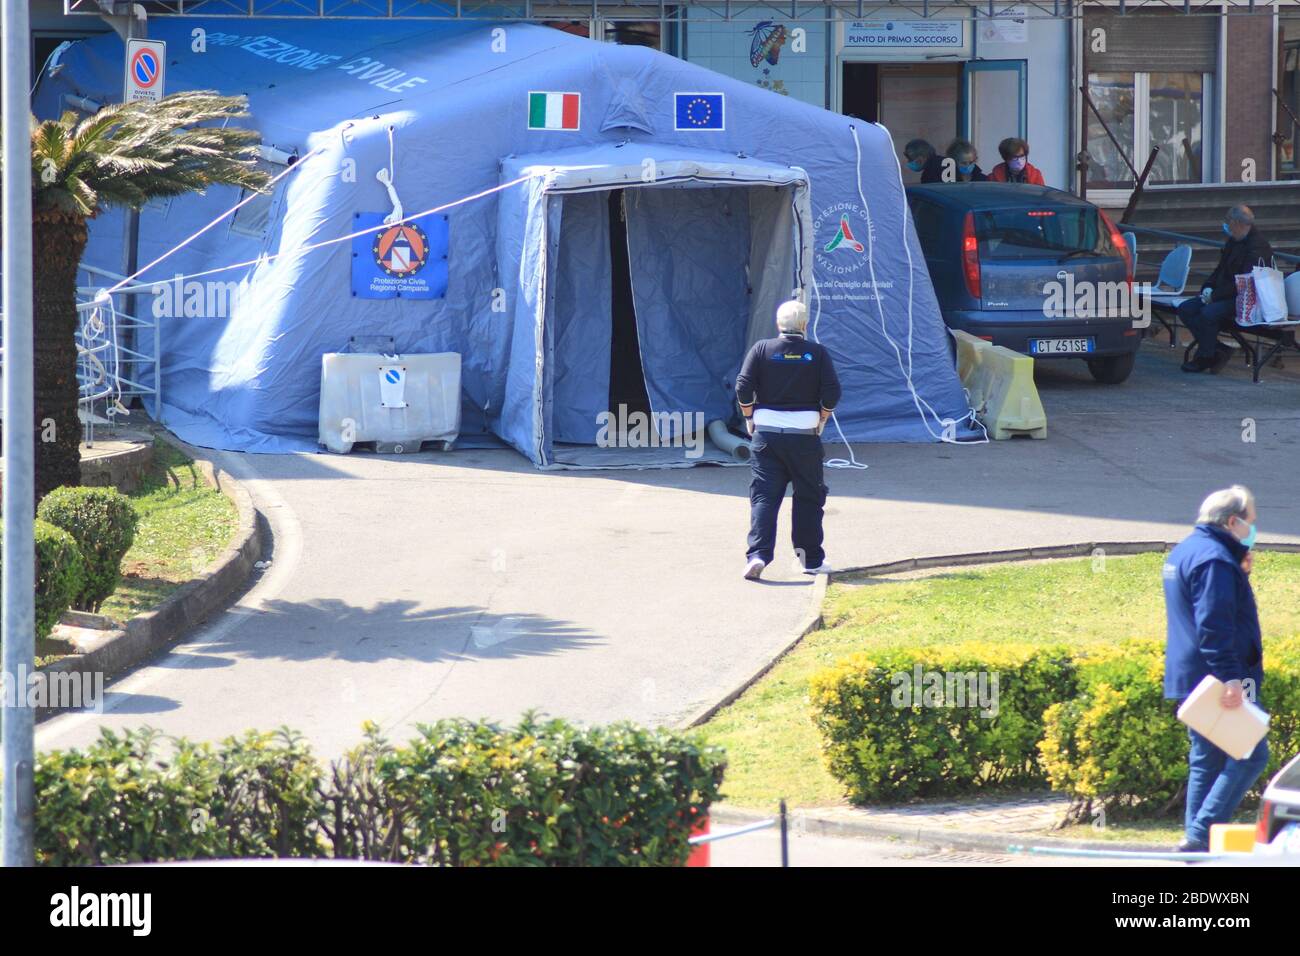 A Civil Protection tent used as pre-triage for suspected patients from Covid-19 located outside the Emergency Department of the Tortora Civil Hospital Stock Photo